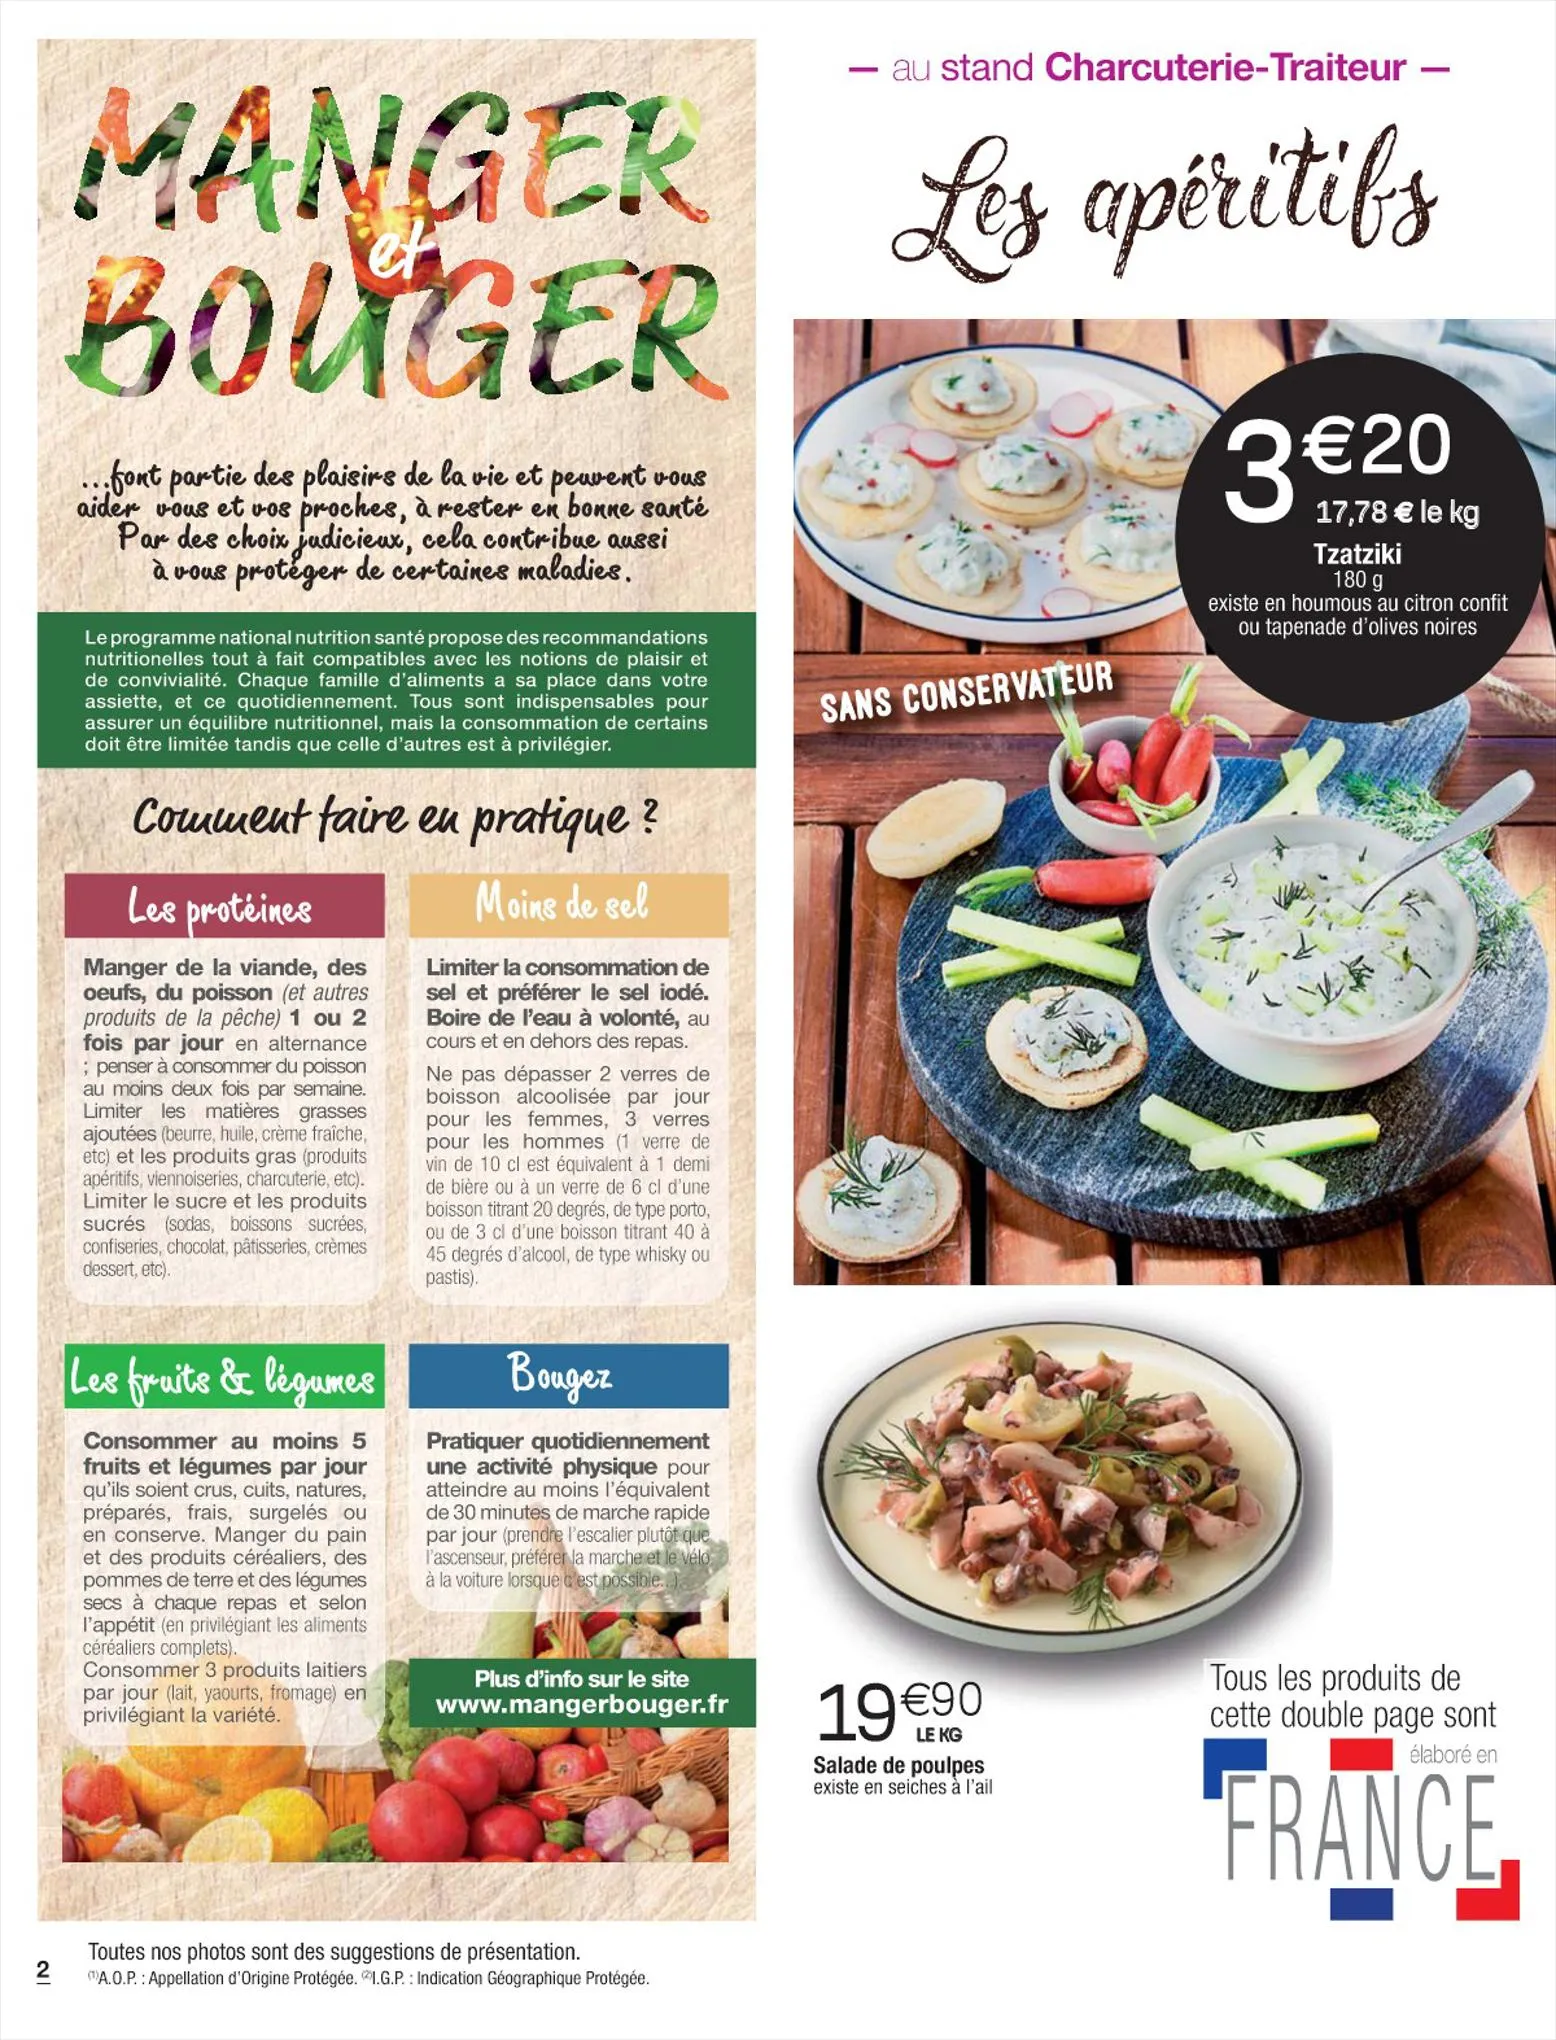 Catalogue Spécial barbecue, page 00002